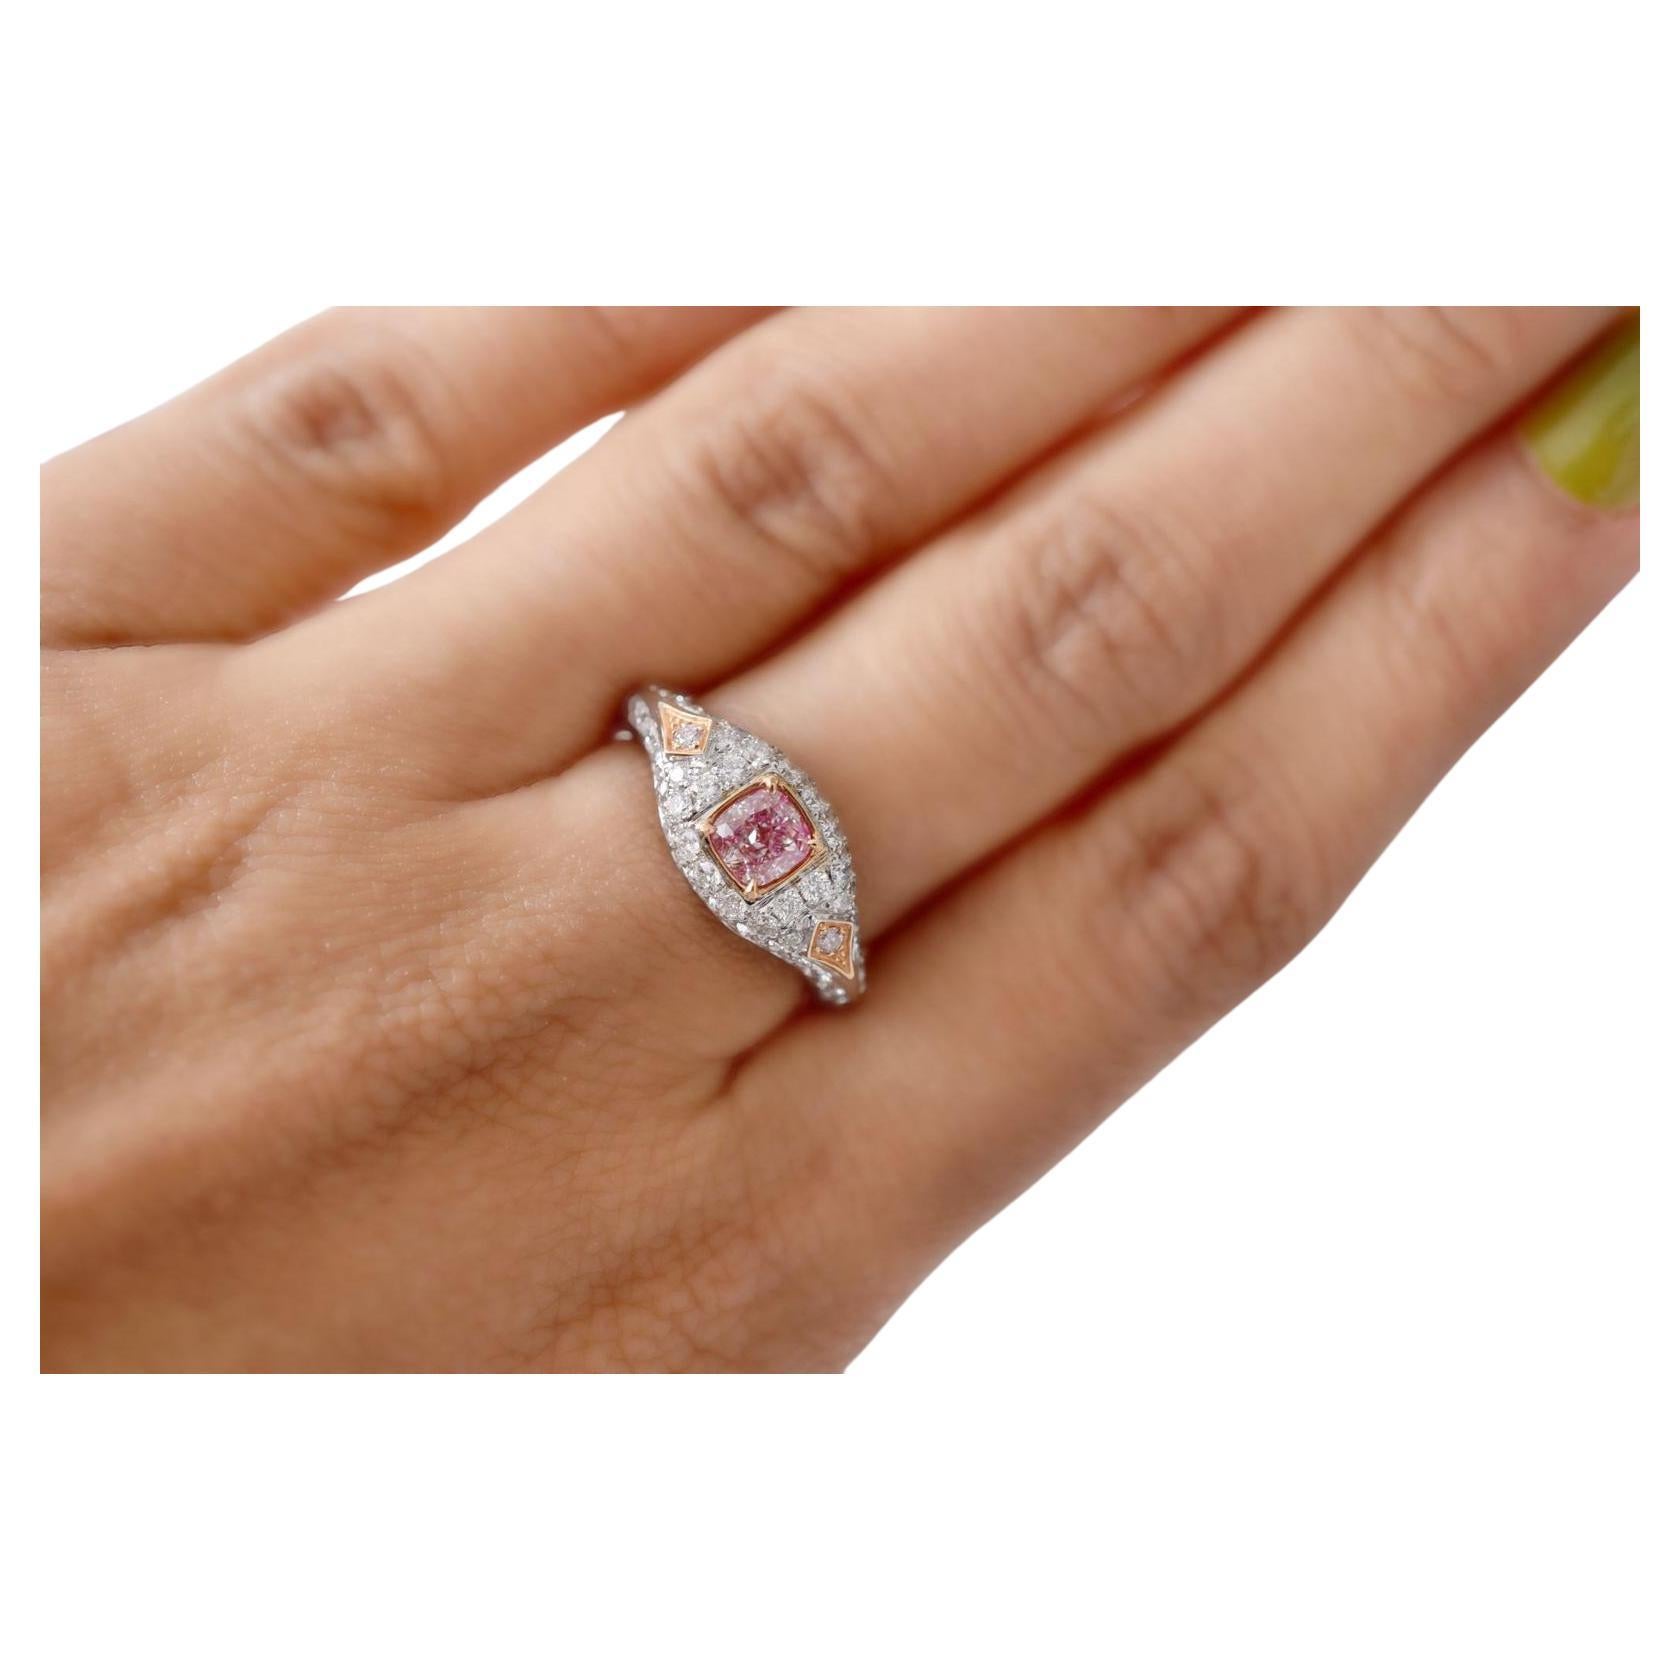 0.71 Carat Faint Pink Diamond Ring I1 Clarity GIA Certified For Sale